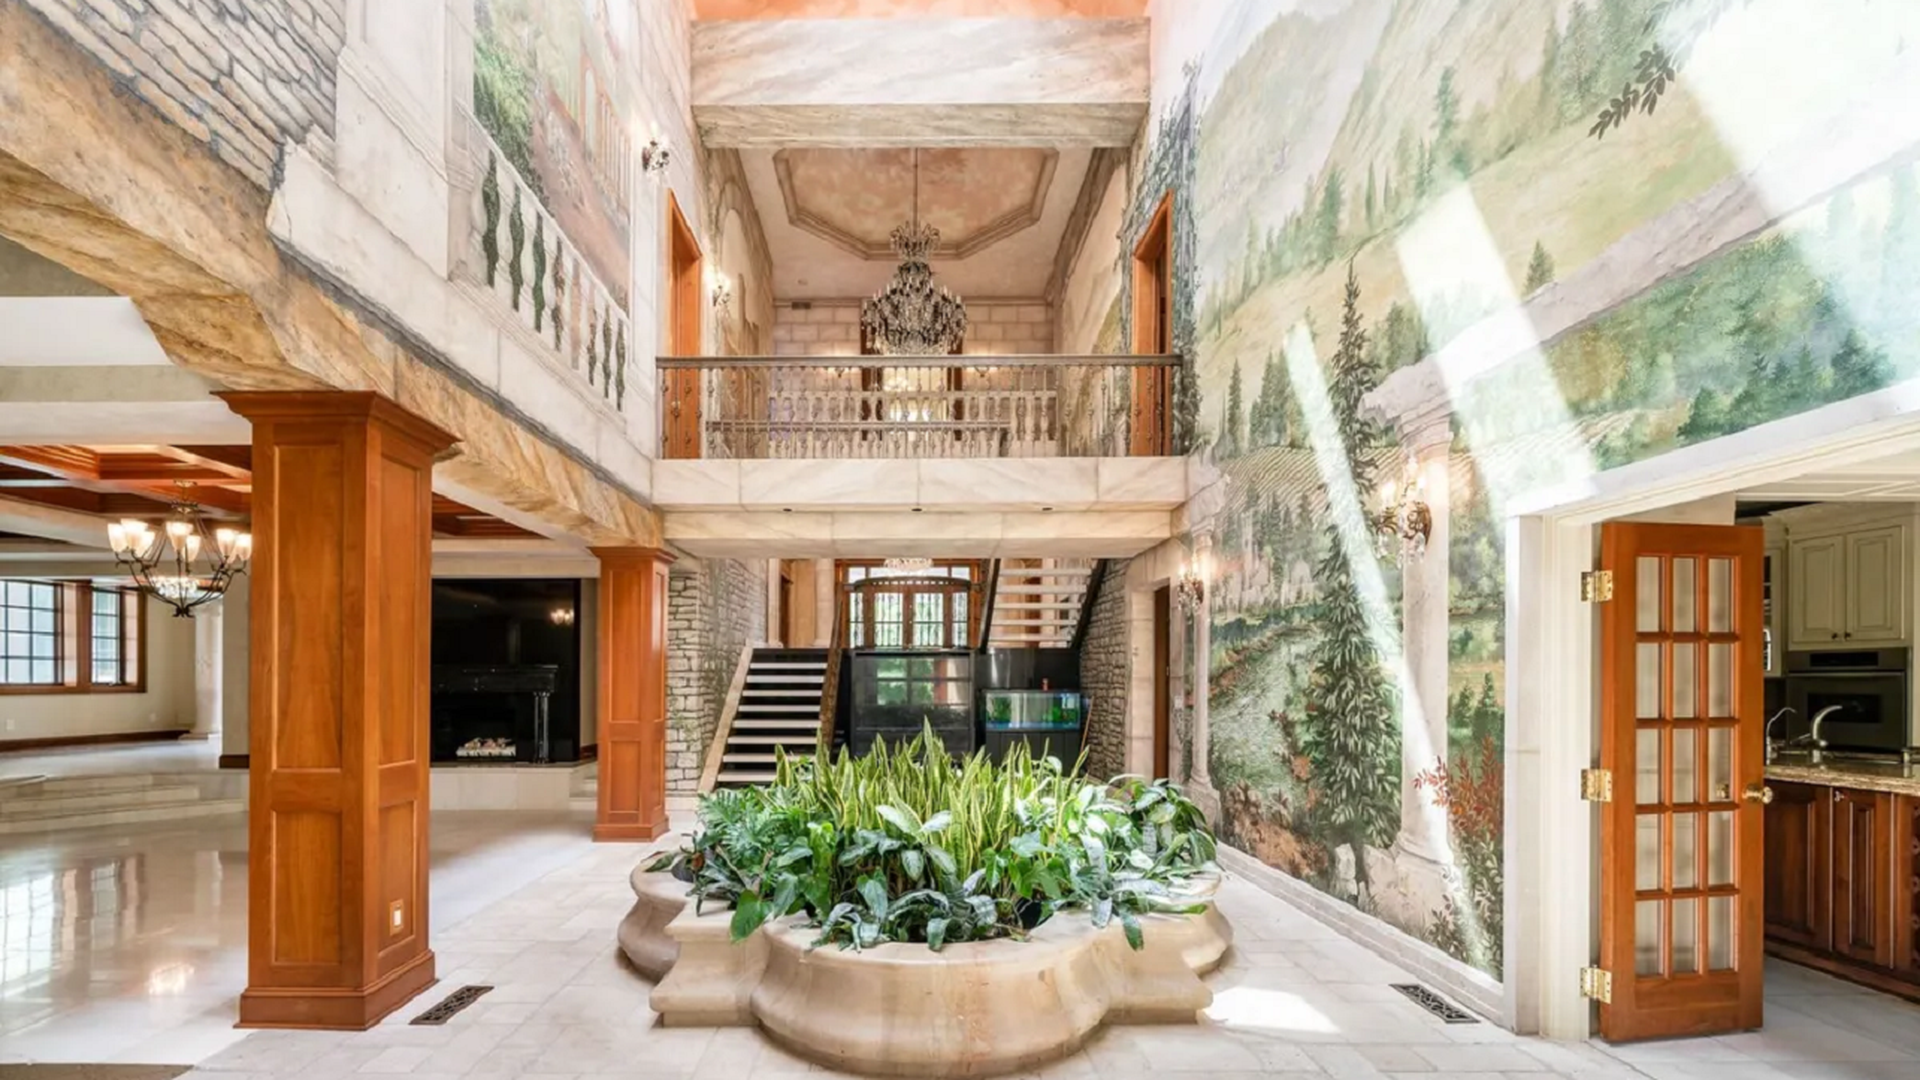 The interior of a Tuscan-style mansion. 